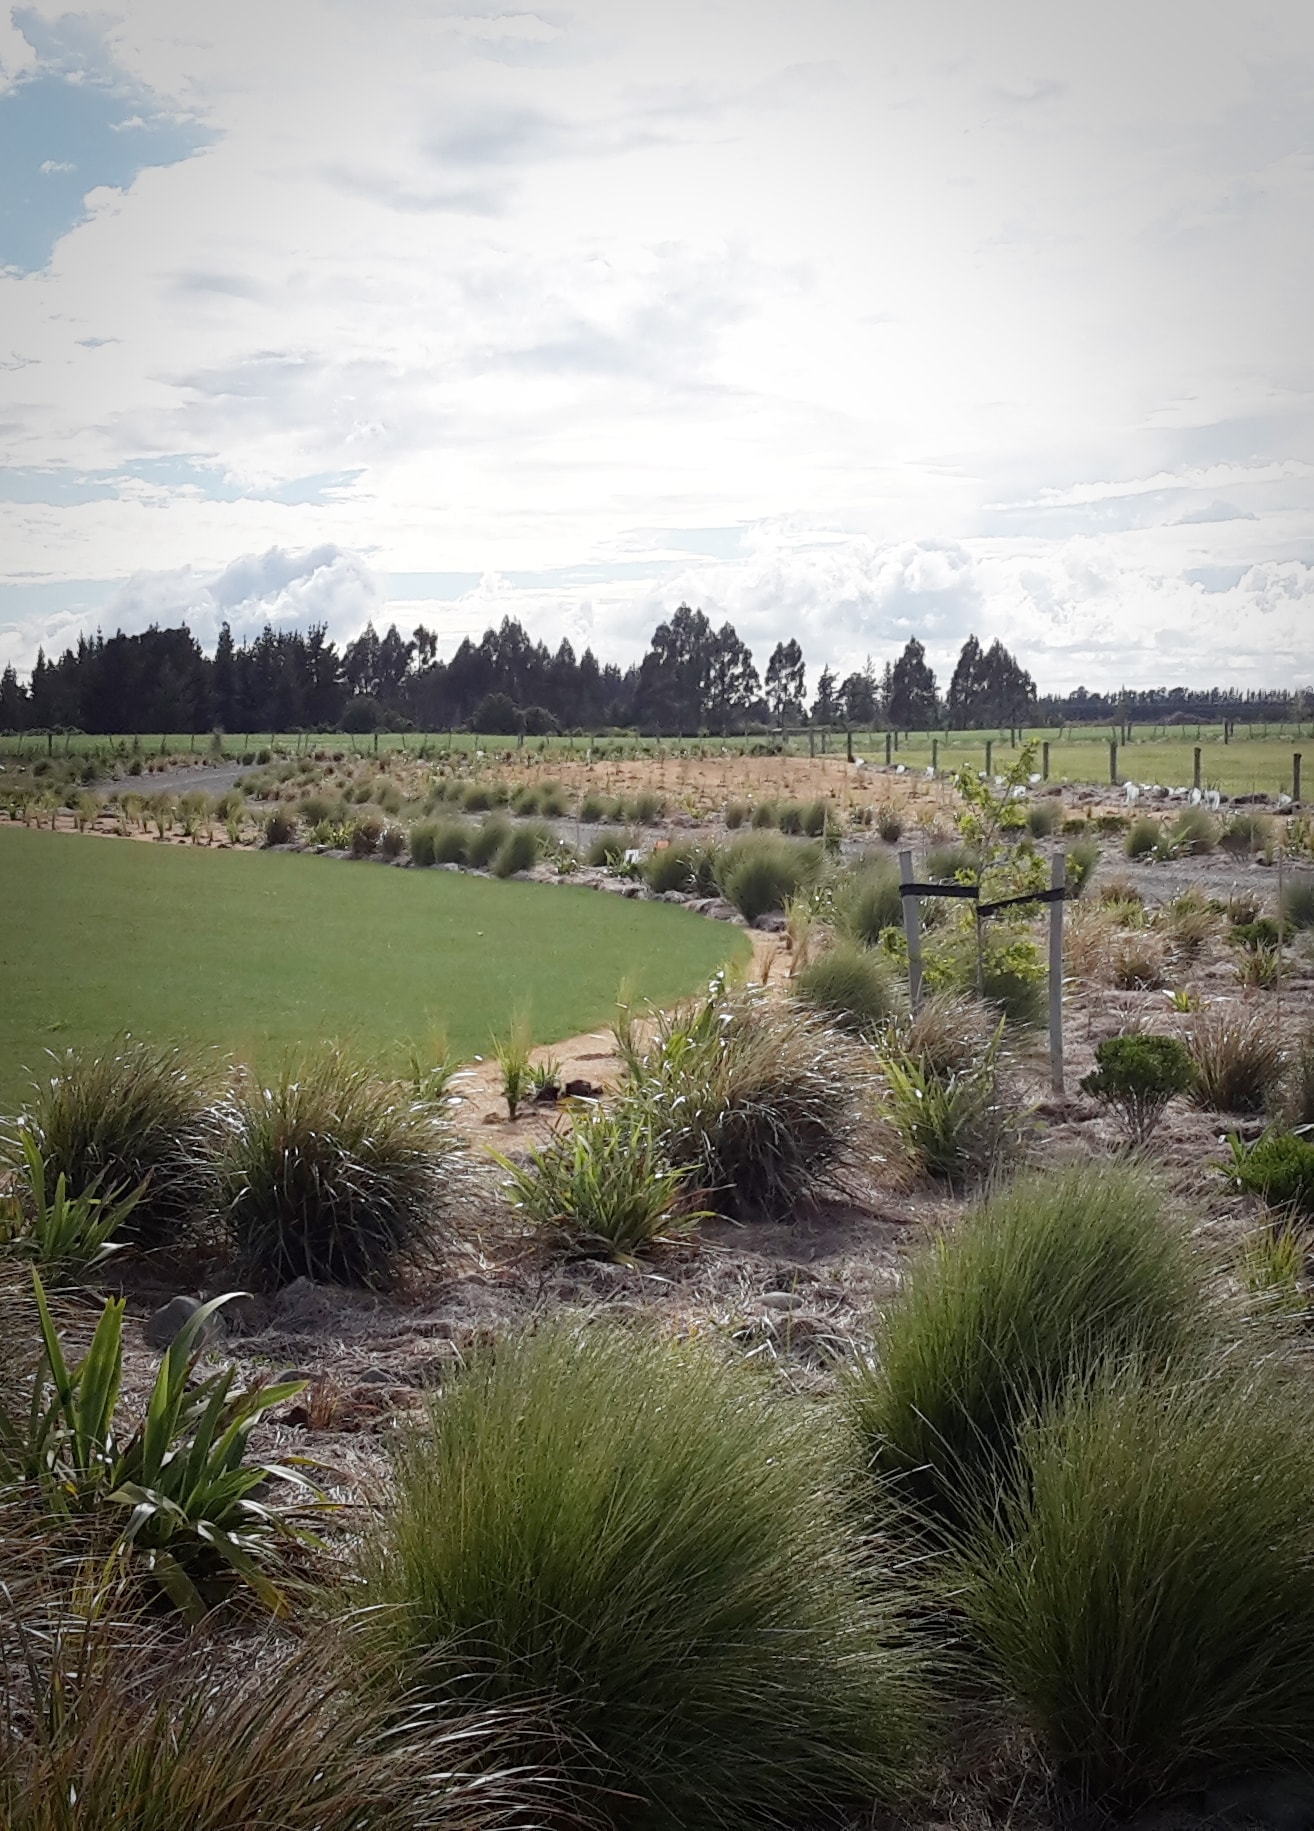 Native Solutions team implements silvicultural practices and highway beautification projects in Canterbury, Christchurch, Auckland, and Nationwide